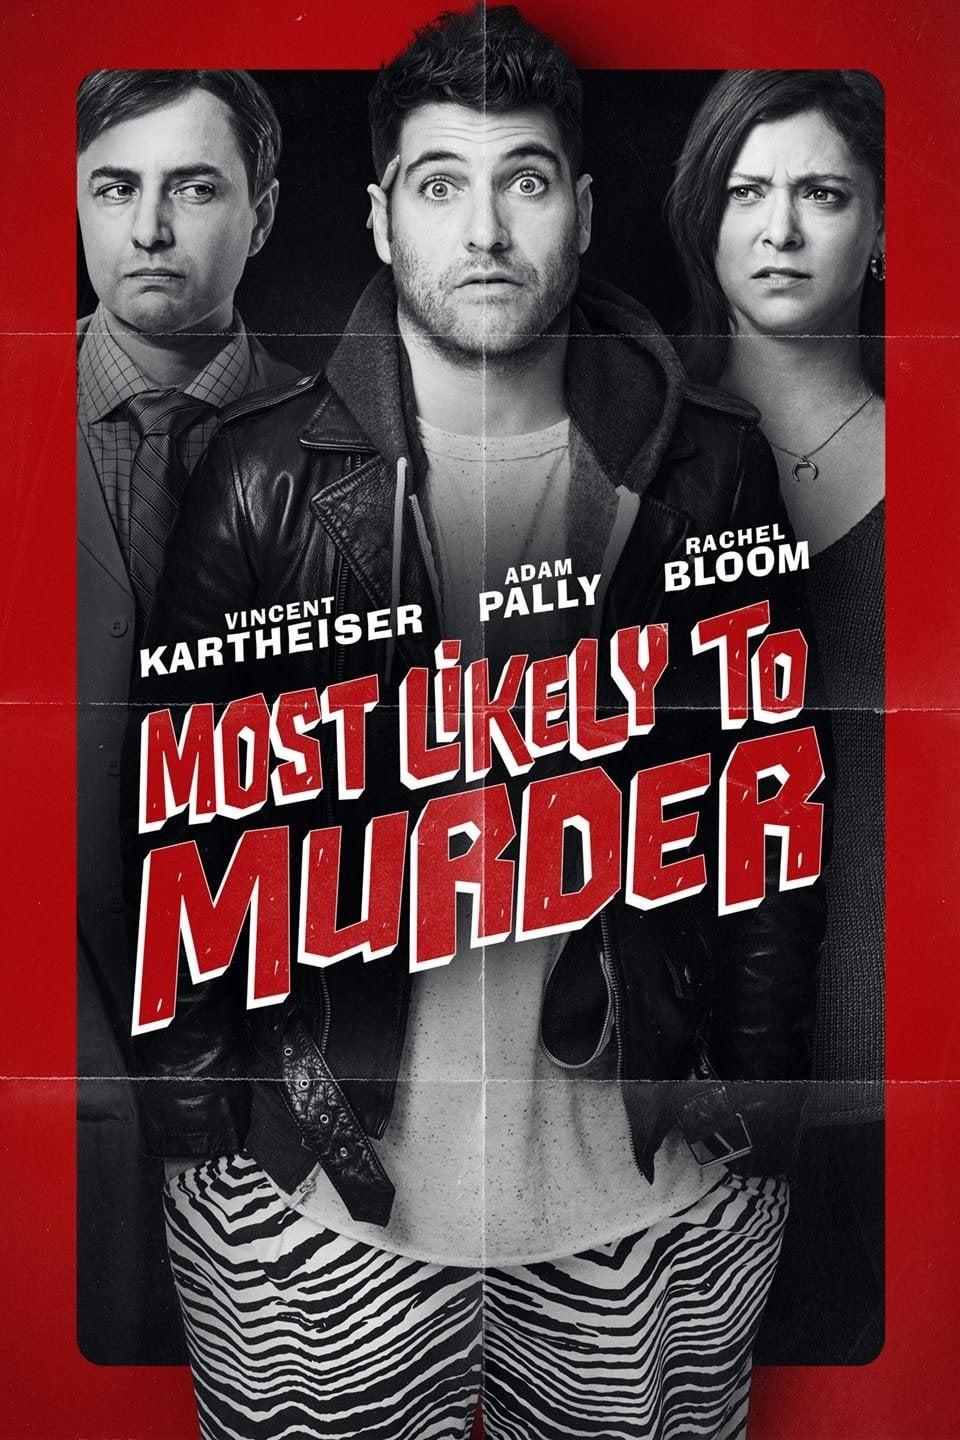 Most Likely to Murder poster